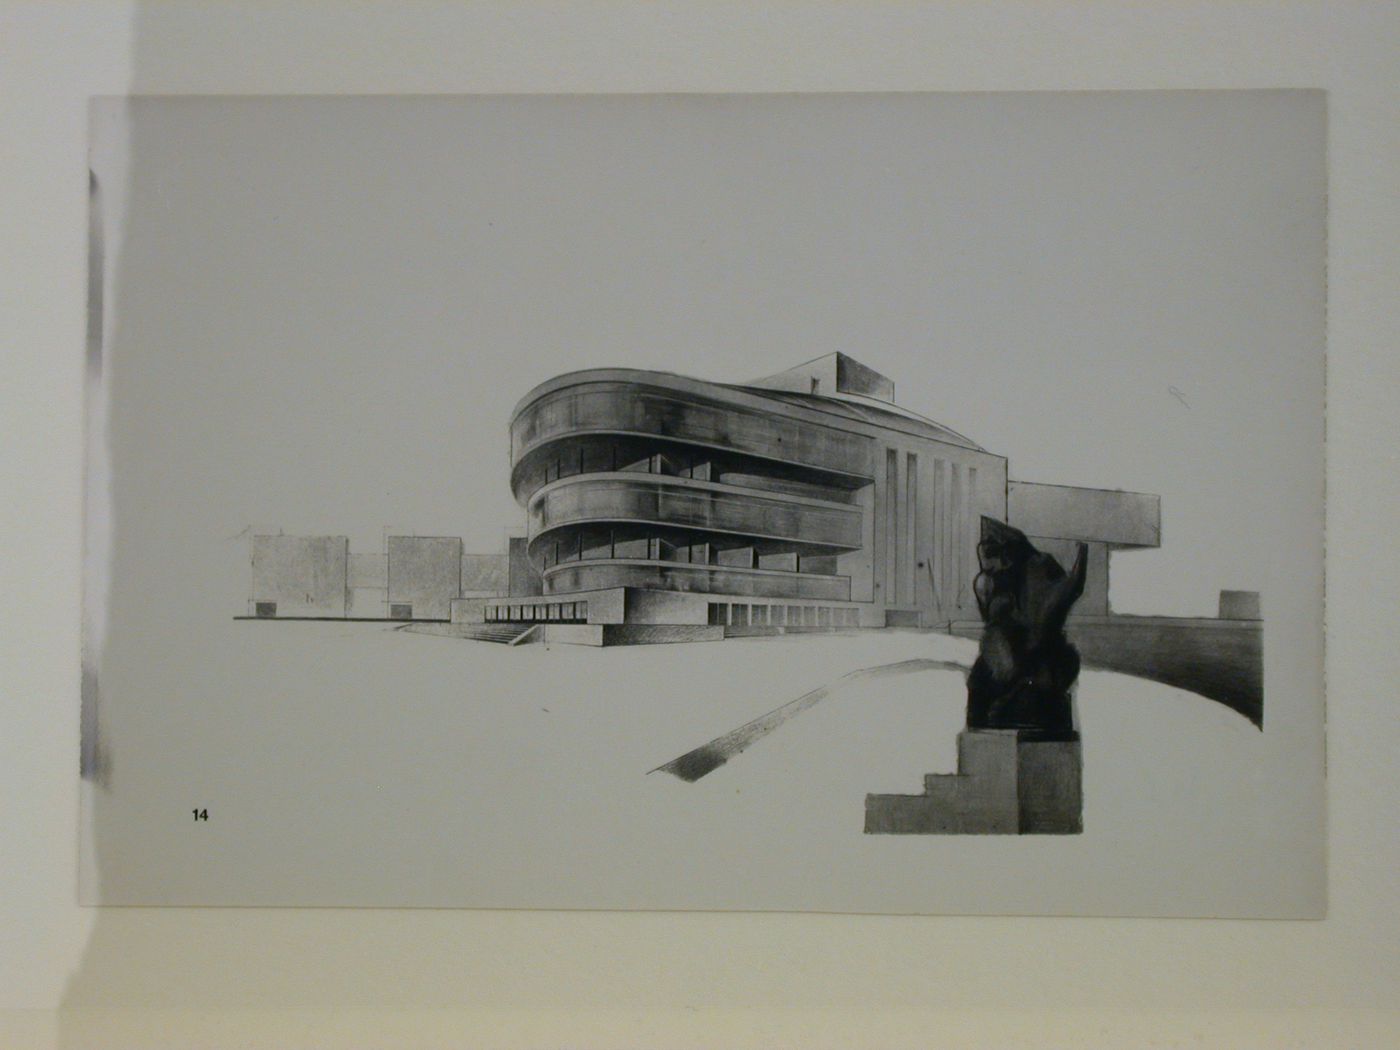 Photograph of a perspective drawing for a competition [?] for a Massed Musical Performance Theater, Kharkov, Soviet Union (now in Ukraine)